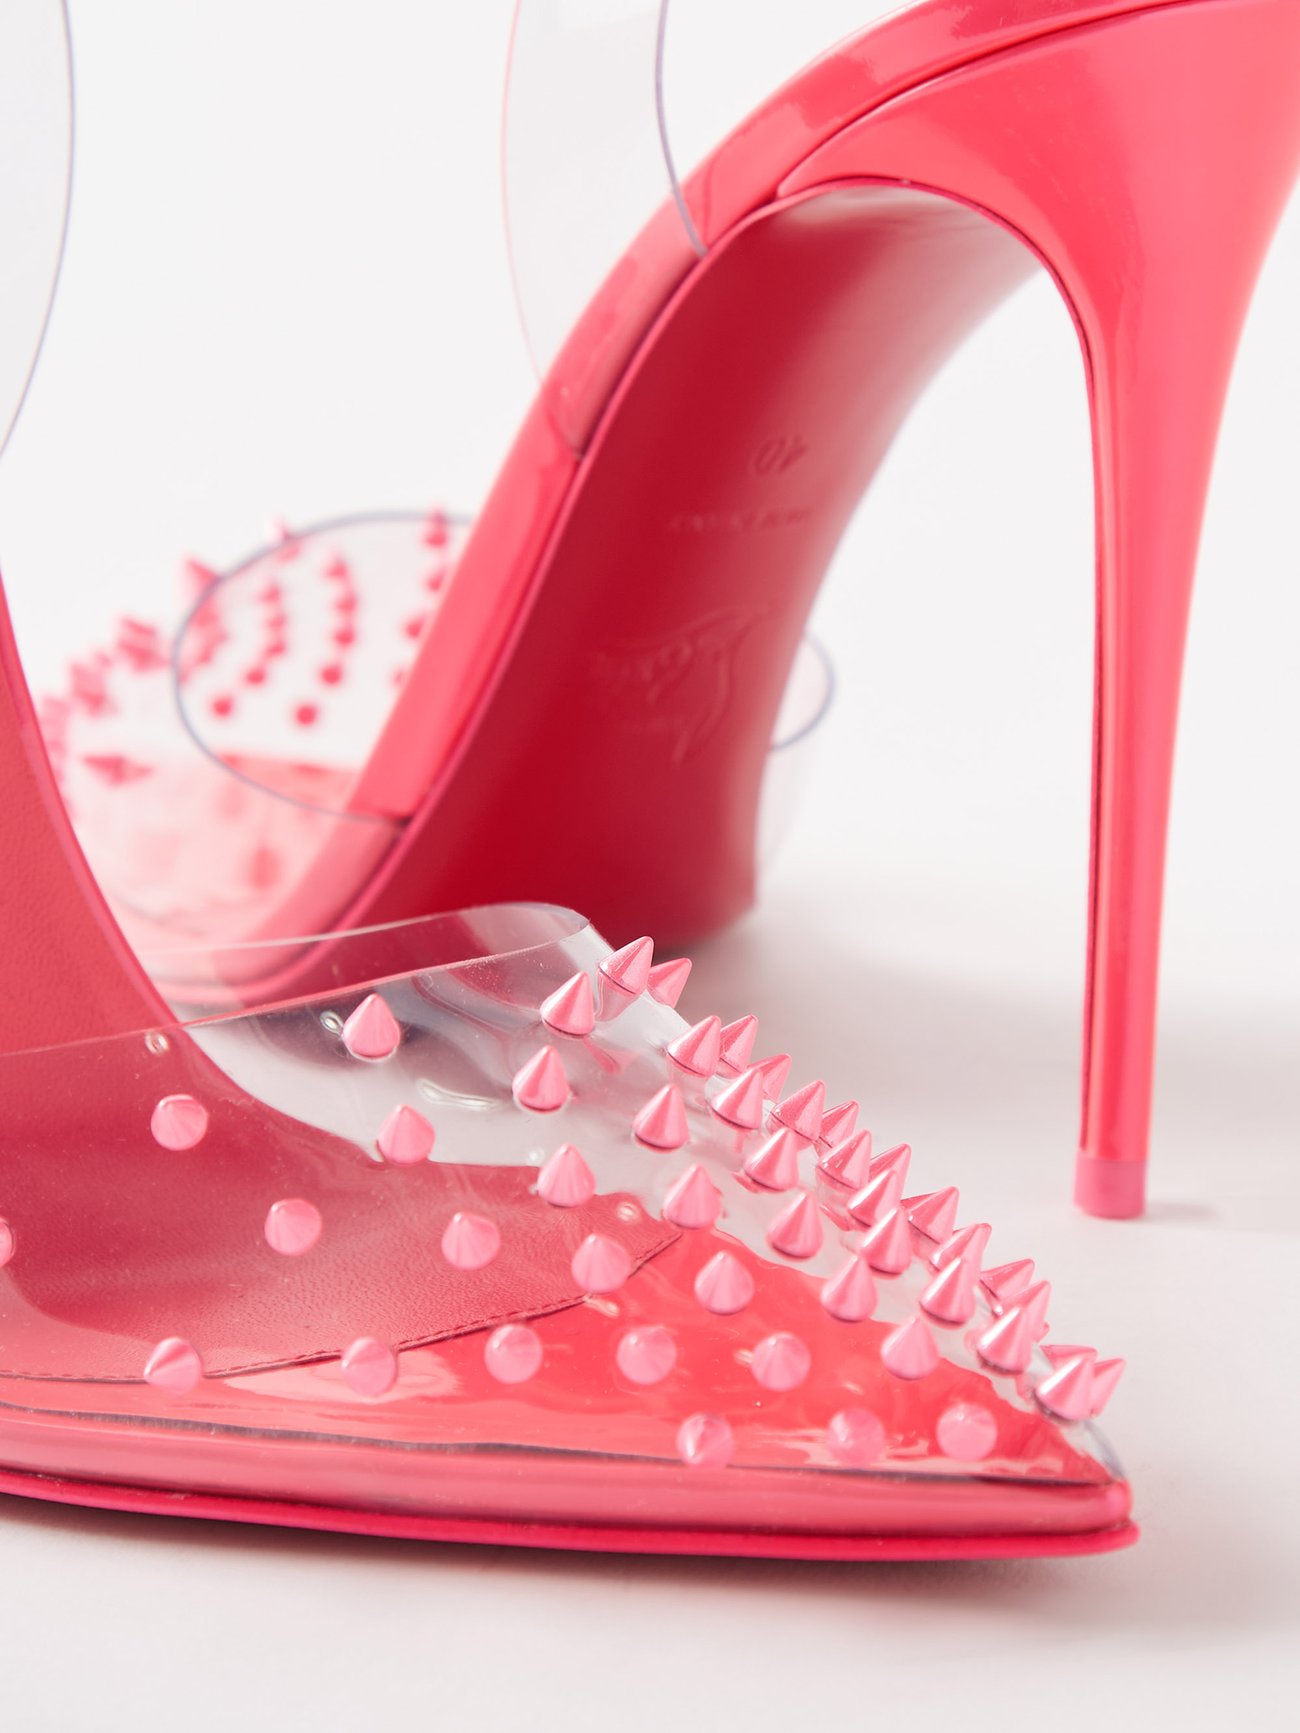 Christian Louboutin Spikoo Spiked PVC Leather Pumps - New in Box - The  Consignment Cafe